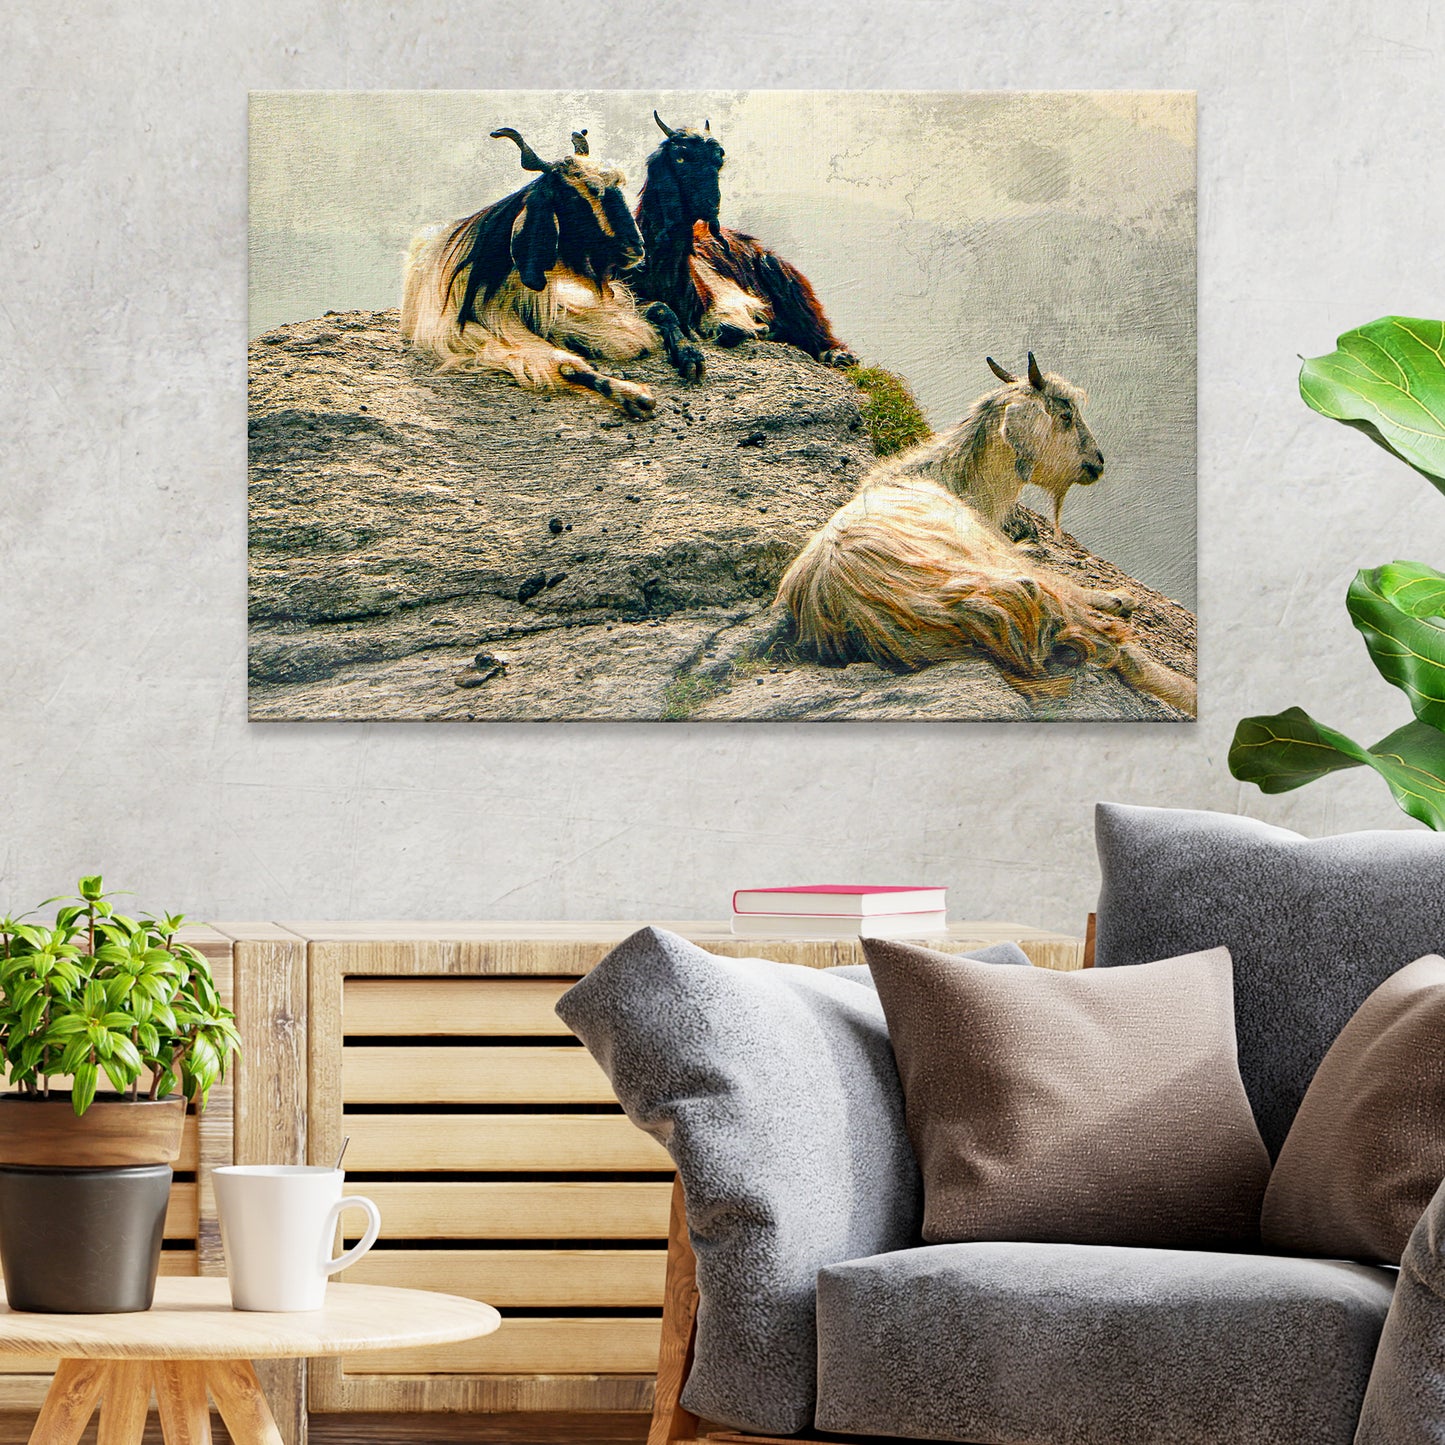 Pashmina Goats On Rocky Mountain Canvas Wall Art Style 2 - Image by Tailored Canvases